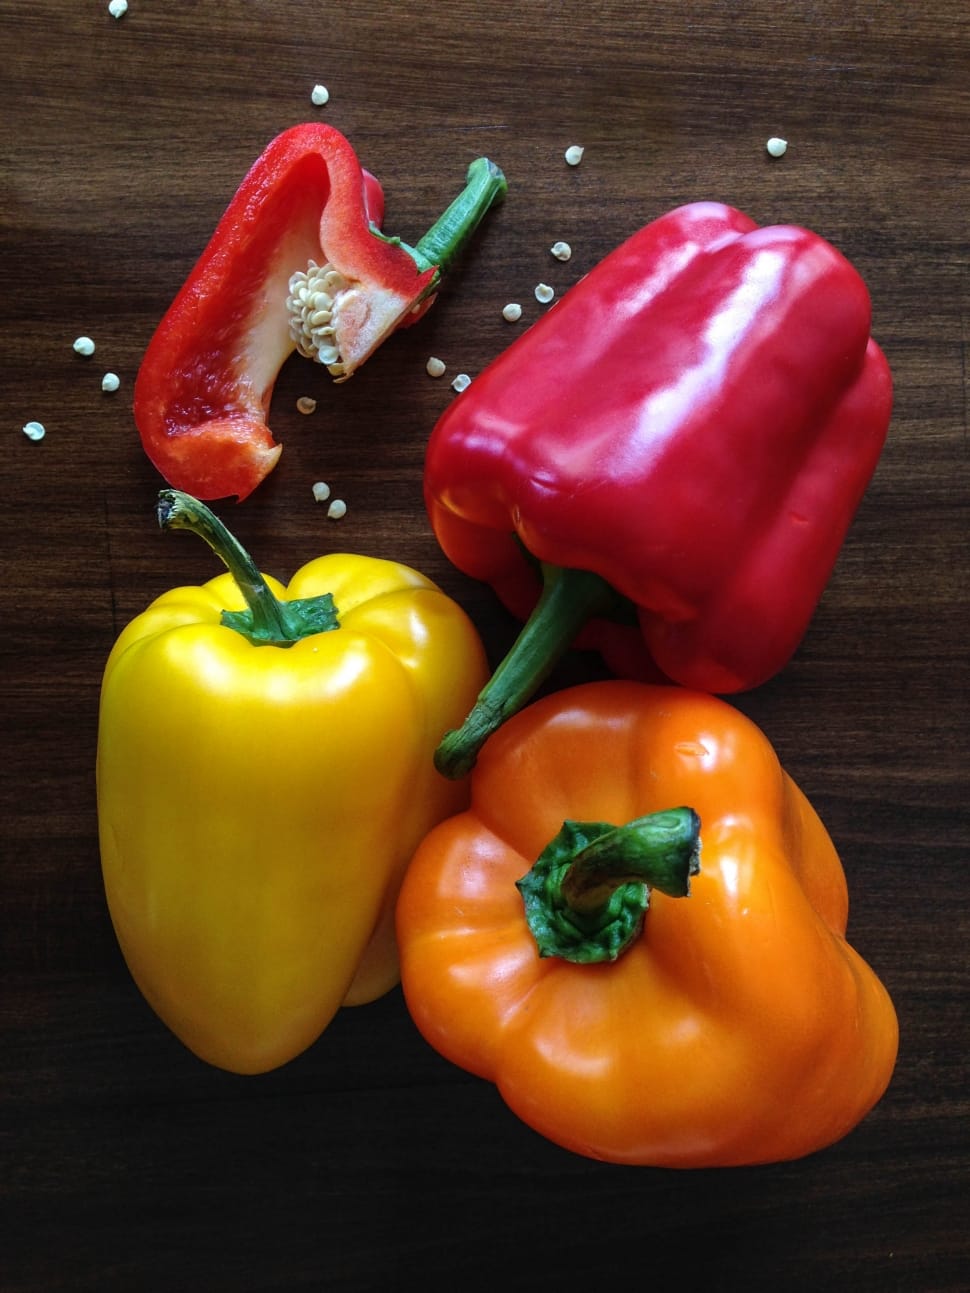 red yellow and orange bell peppers preview